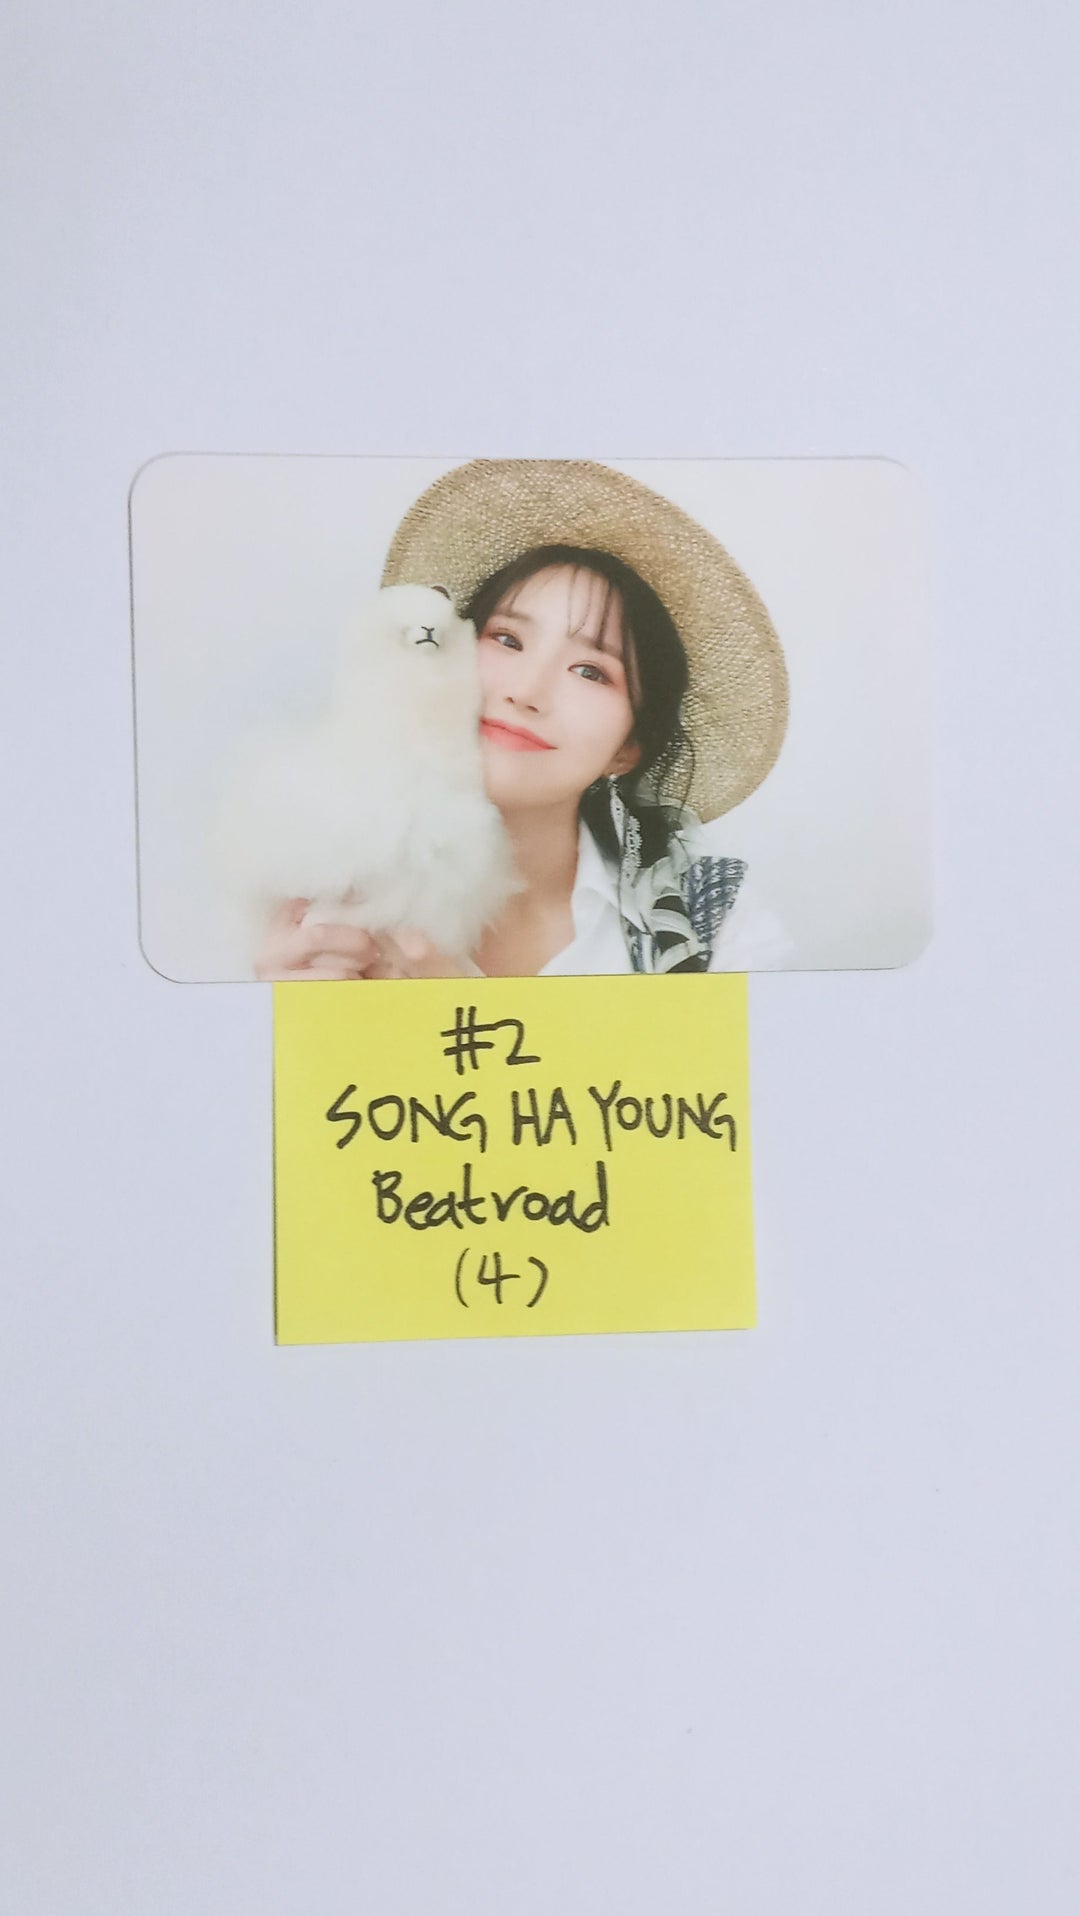 Fromis_9 "9 Way Ticket" -Beatroad Fan Sign Event Photocard